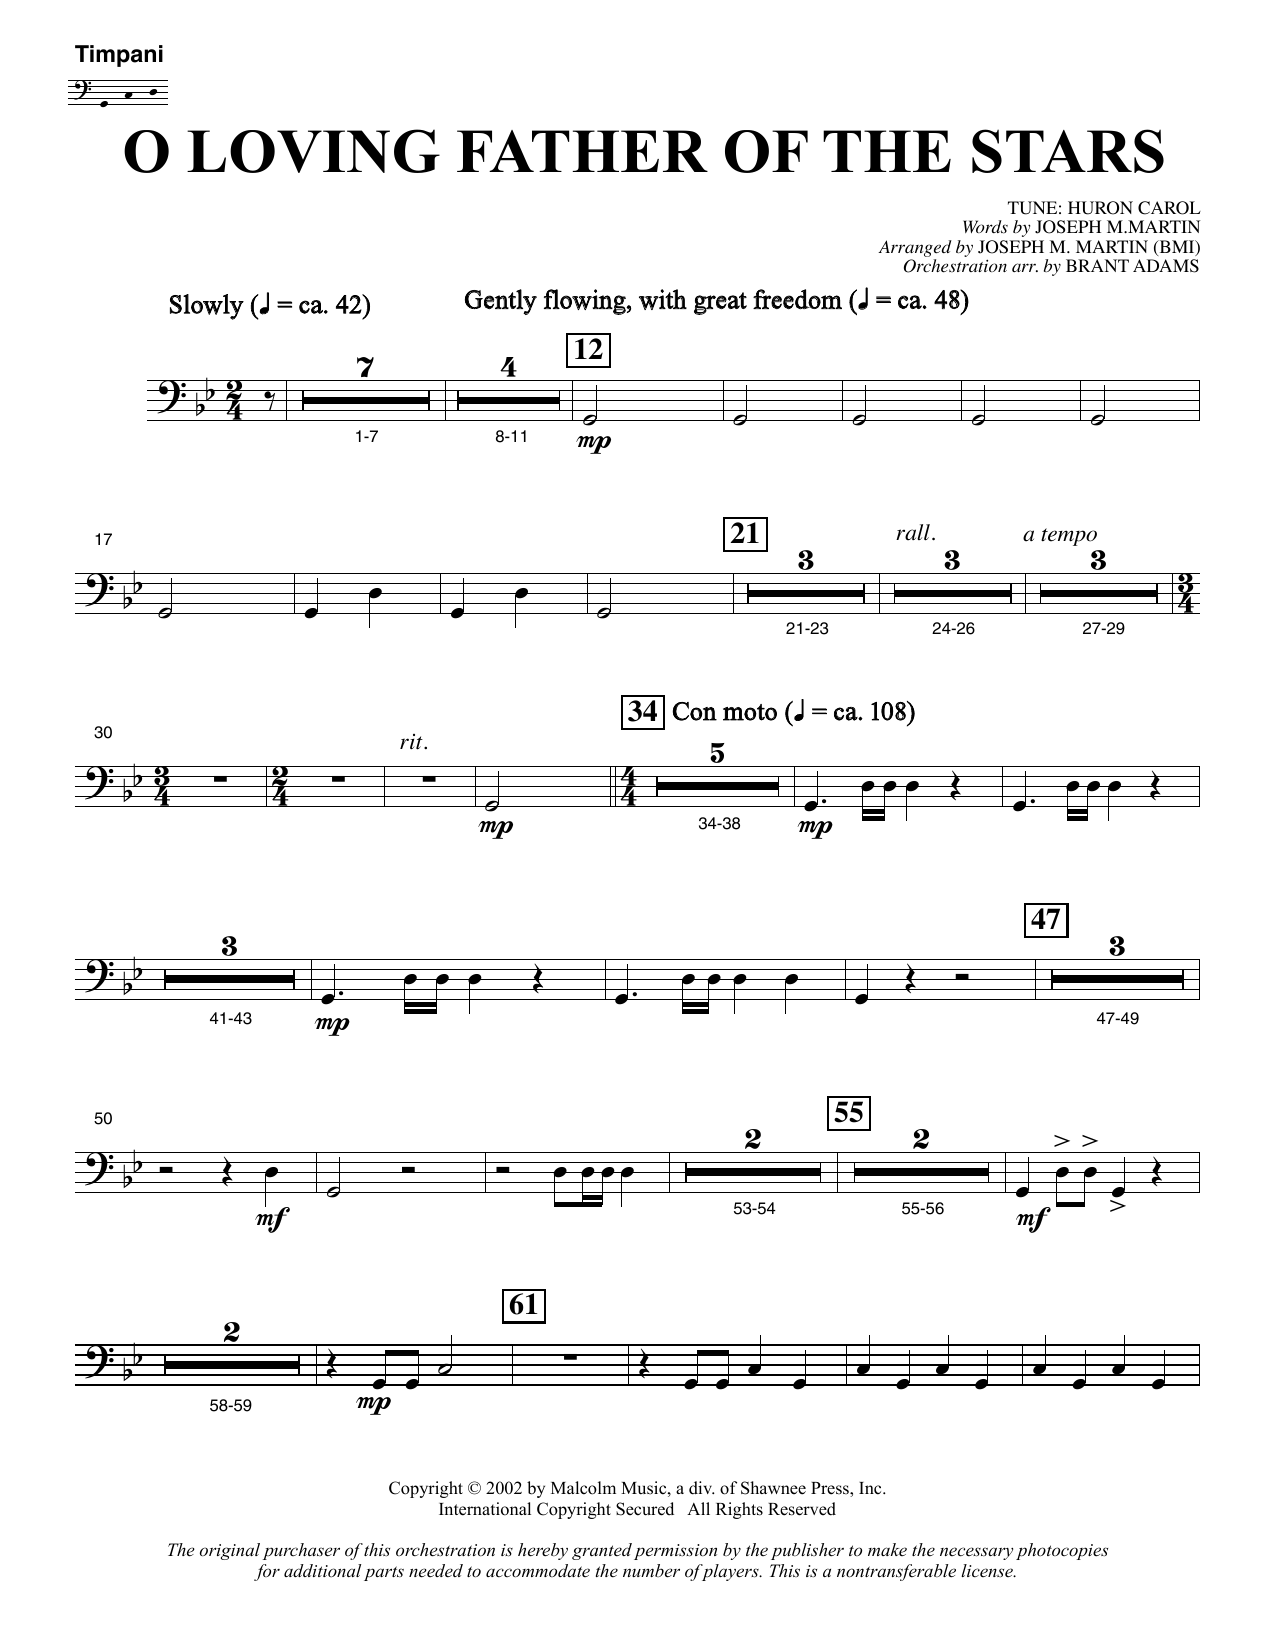 Joseph M. Martin O Loving Father Of The Stars (from Morning Star) - Timpani sheet music notes and chords. Download Printable PDF.